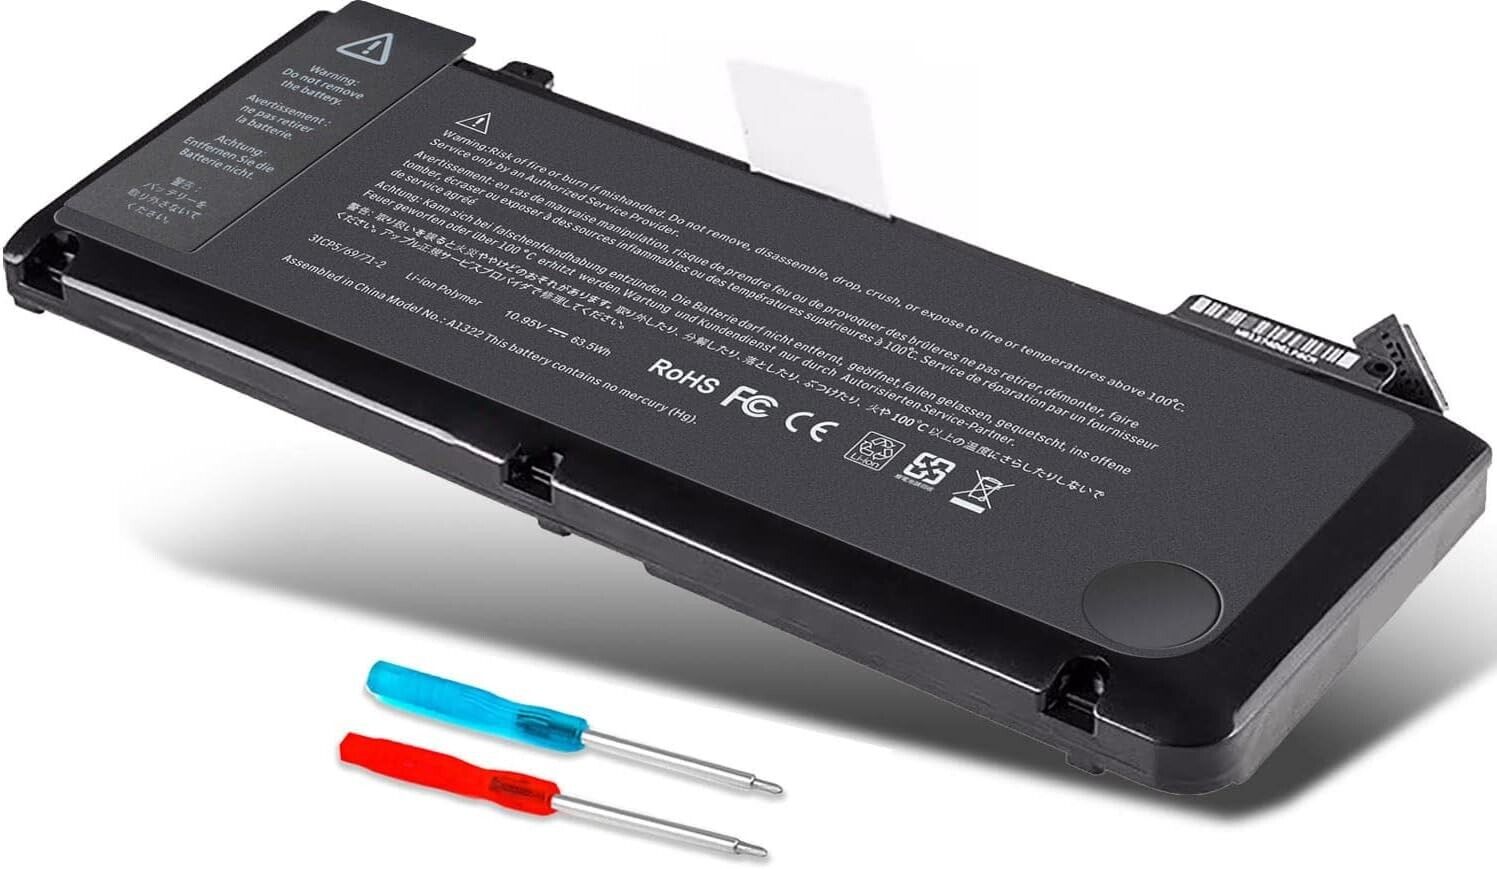 A1322 Battery for MacBook Pro 13 inch Mid 2012,Mid 2009,Mid 2010,Early 2011